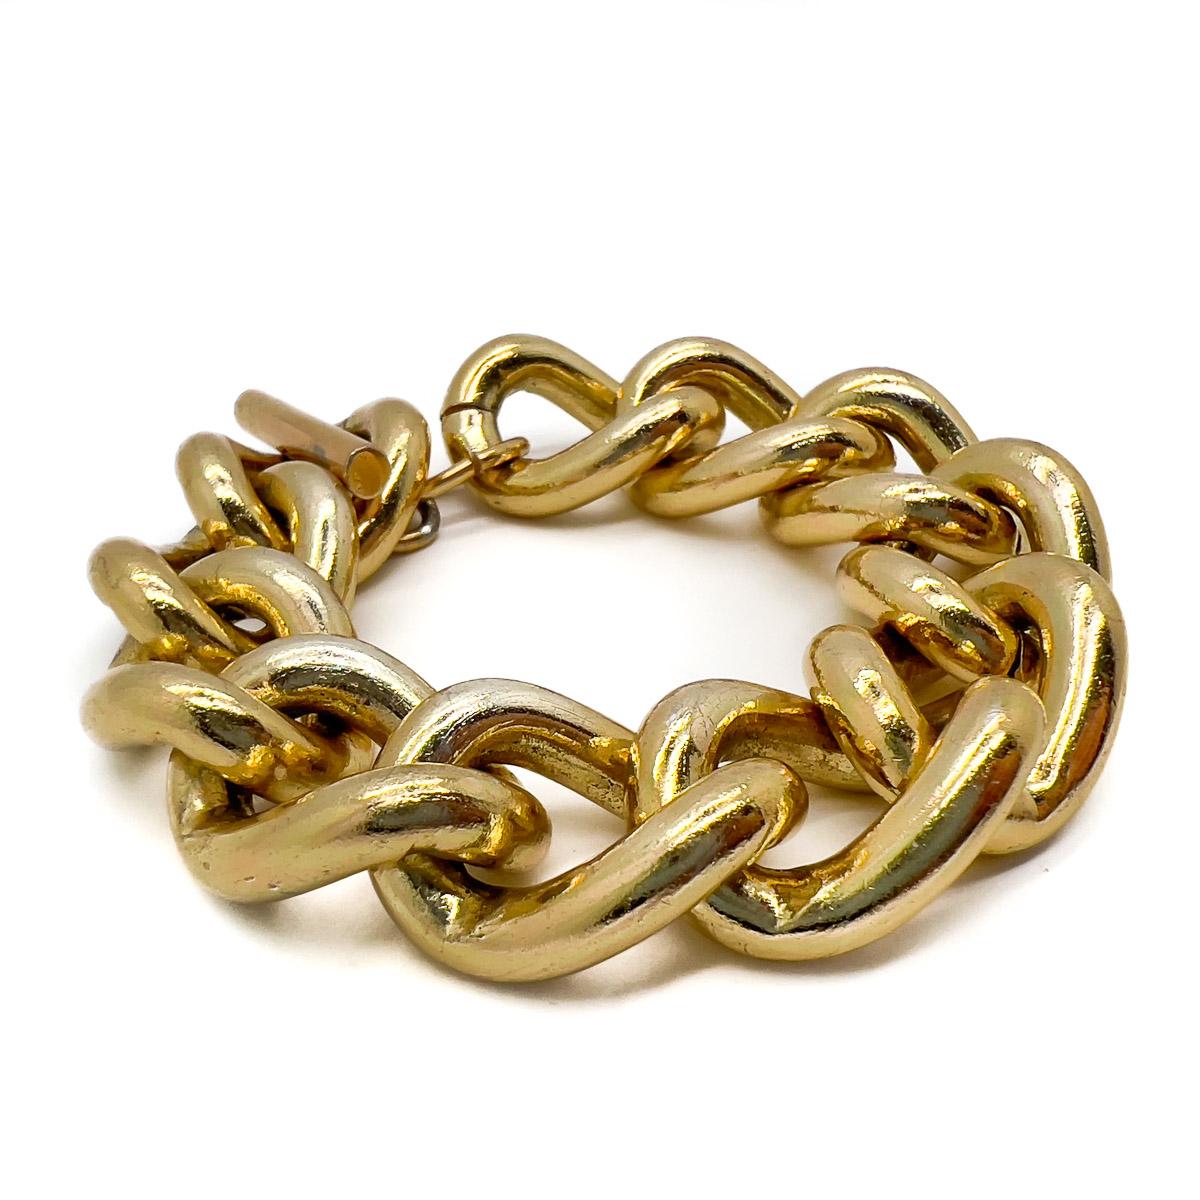 A classic Vintage Chunky Curb Bracelet that will be forever the perfect finishing touch for your look and a jewel box hero.

An unsigned beauty. A rare treasure. Just because a jewel doesn’t carry a designer name, doesn’t mean it isn't coveted. The